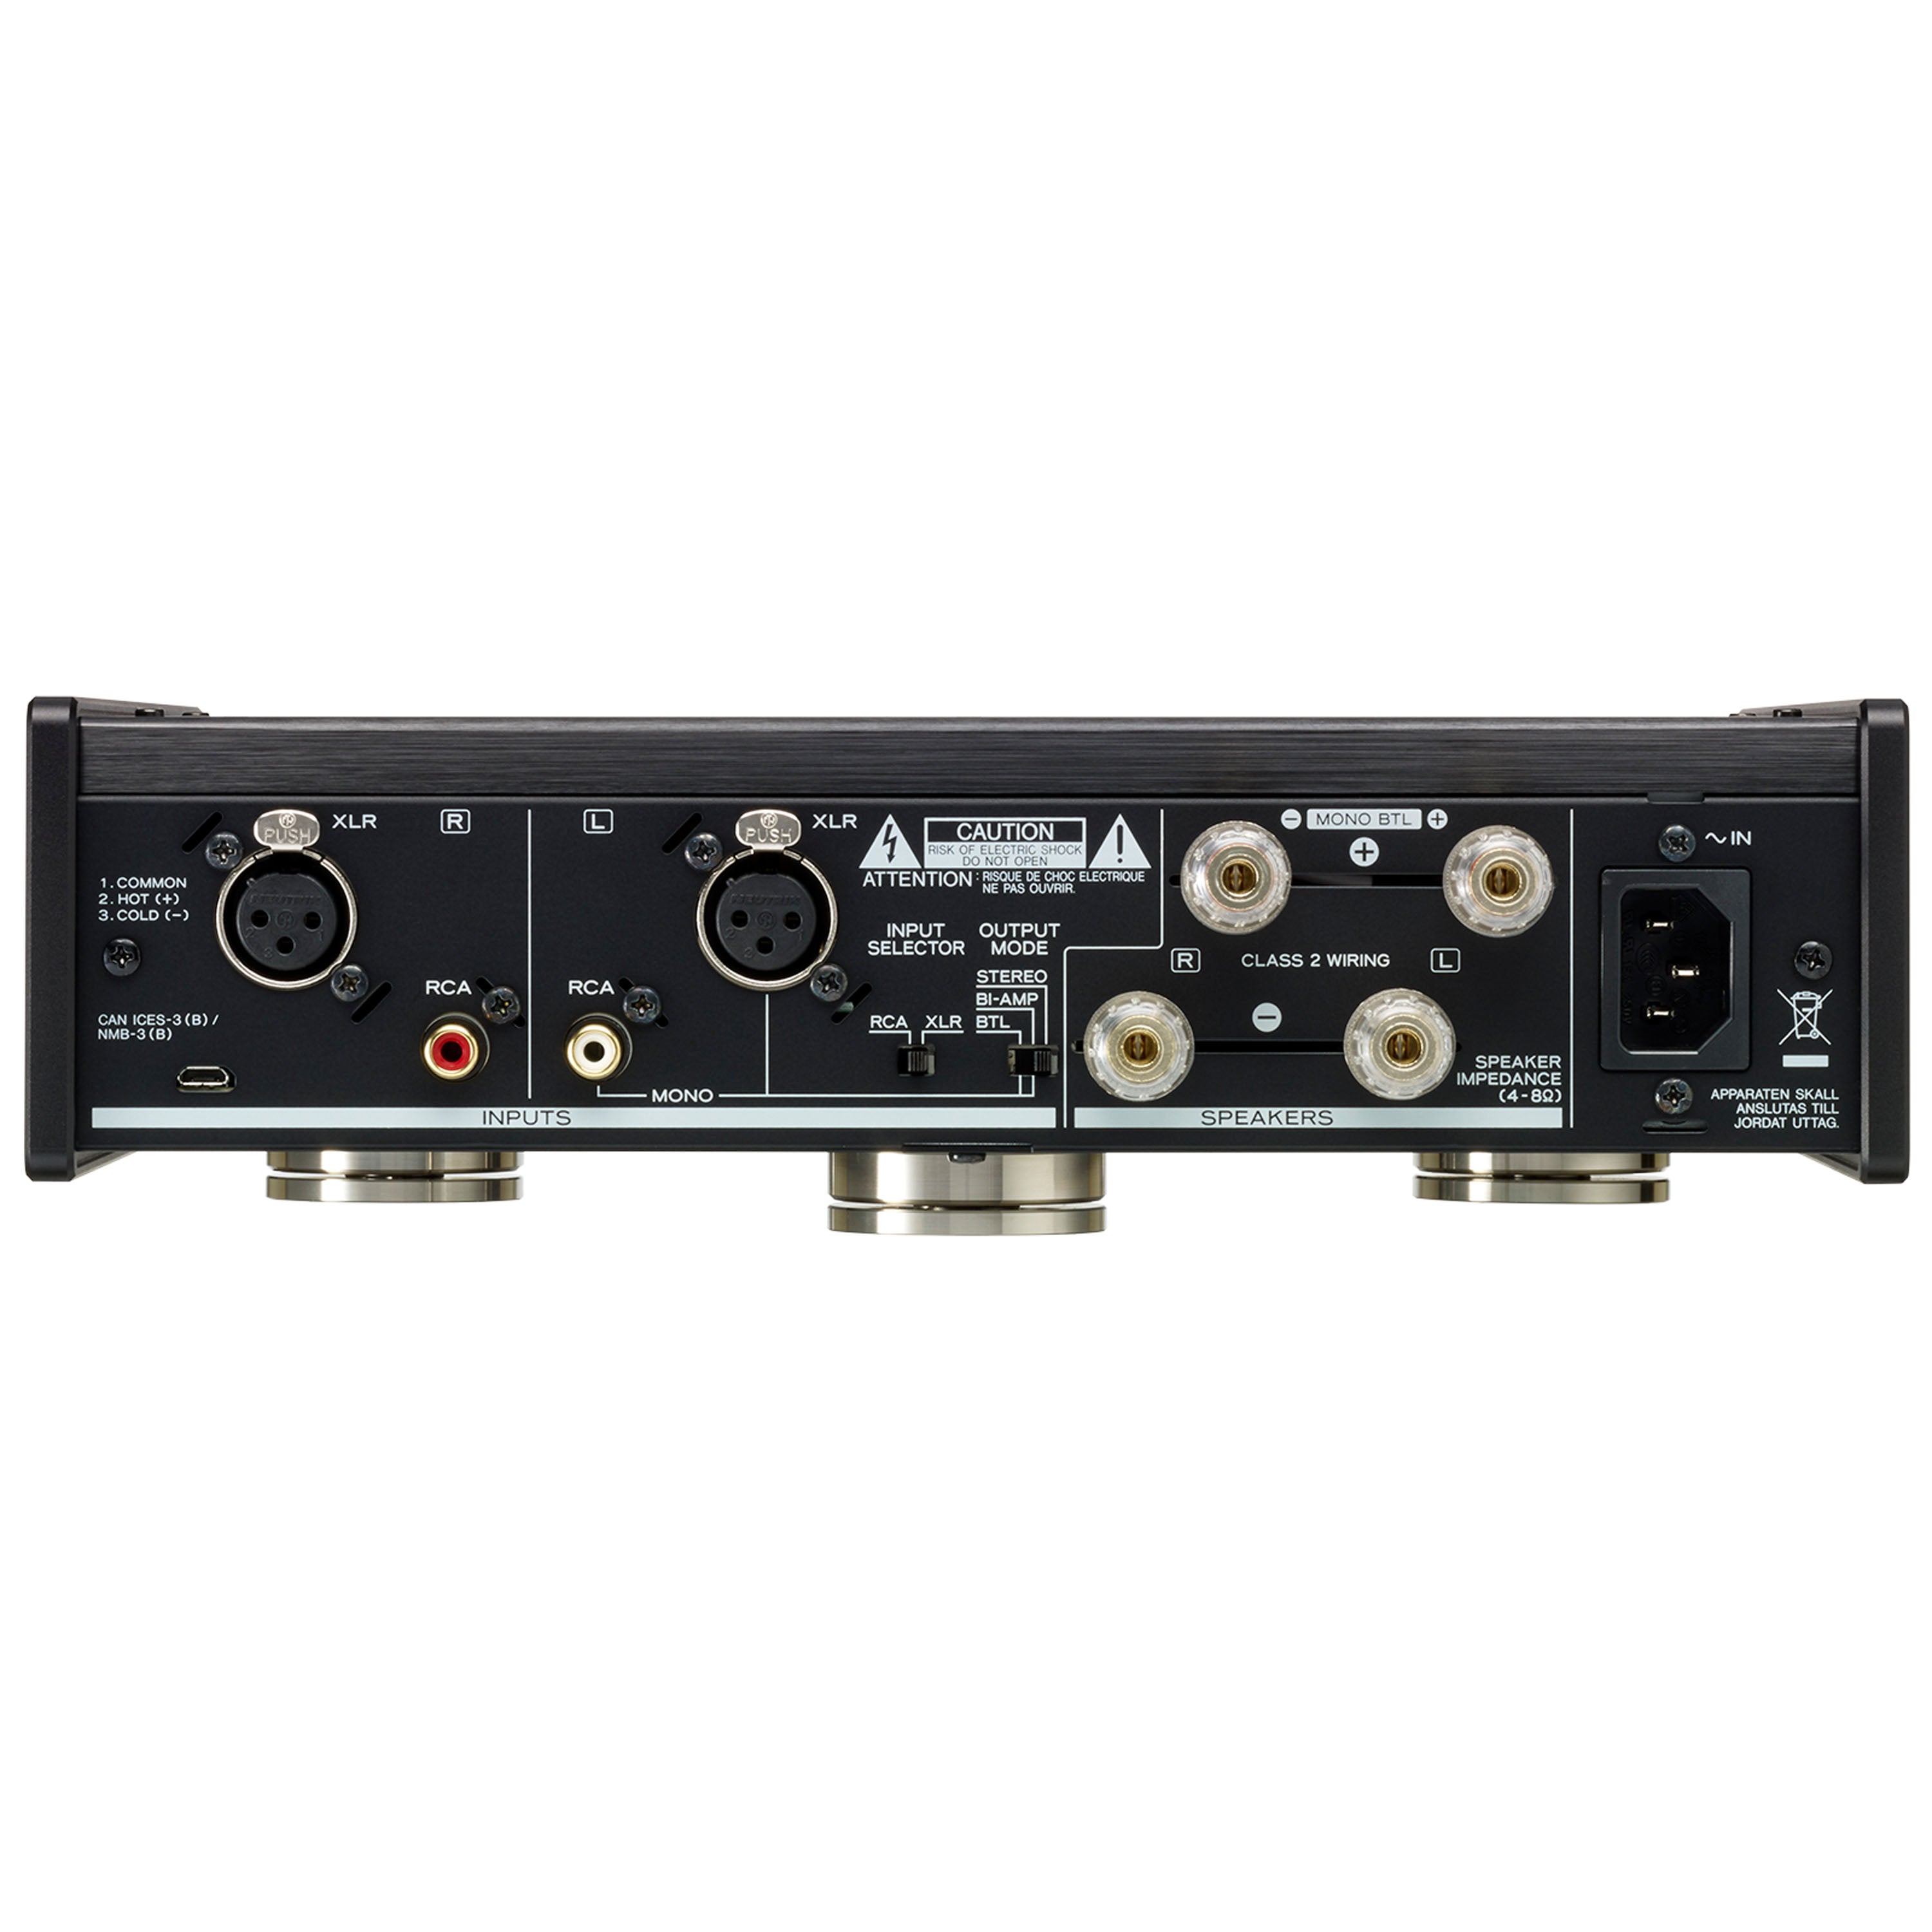 TEAC AP-505 Stereo Compact Amplifier (Black)